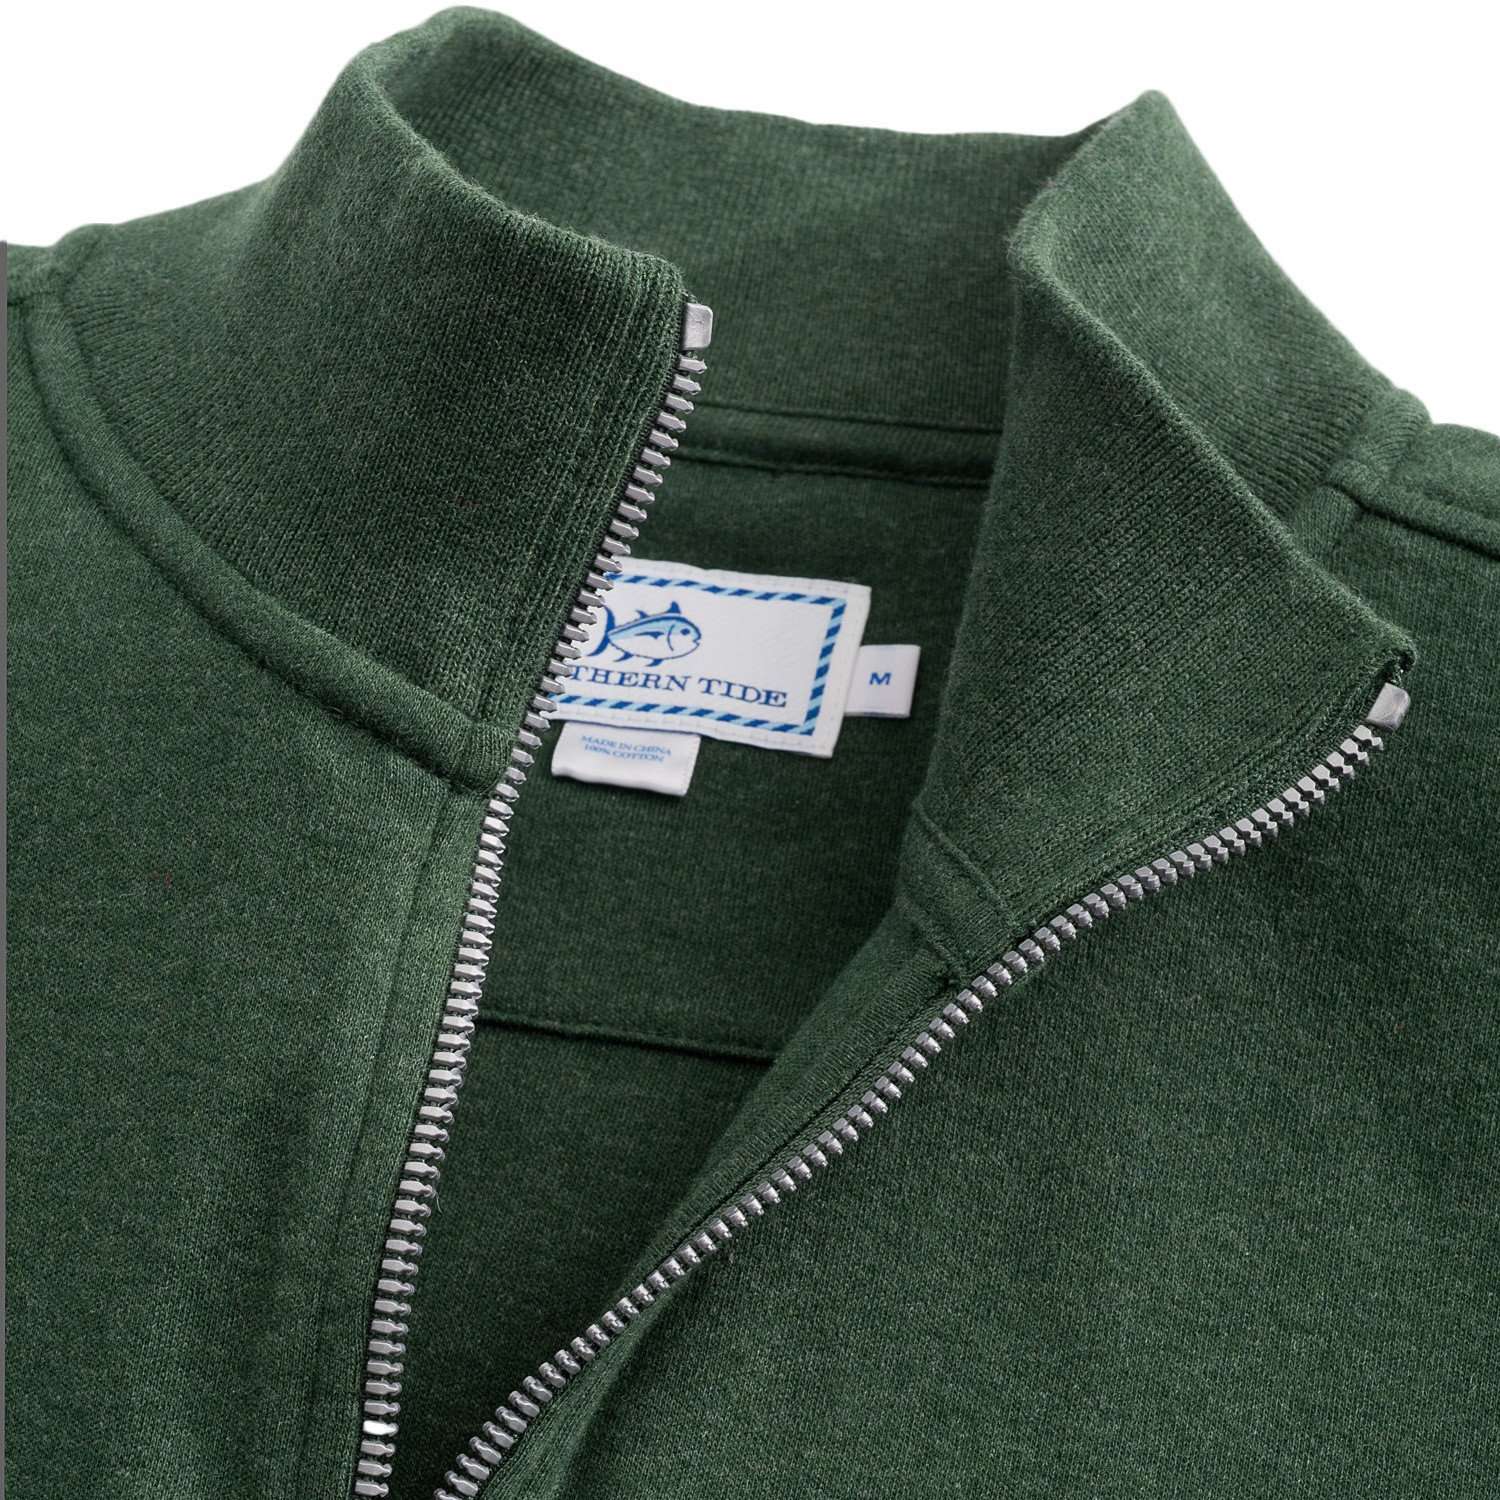 Newport Heather Lightweight 1/4 Zip Pullover in Pineneedle Green by Southern Tide - Country Club Prep